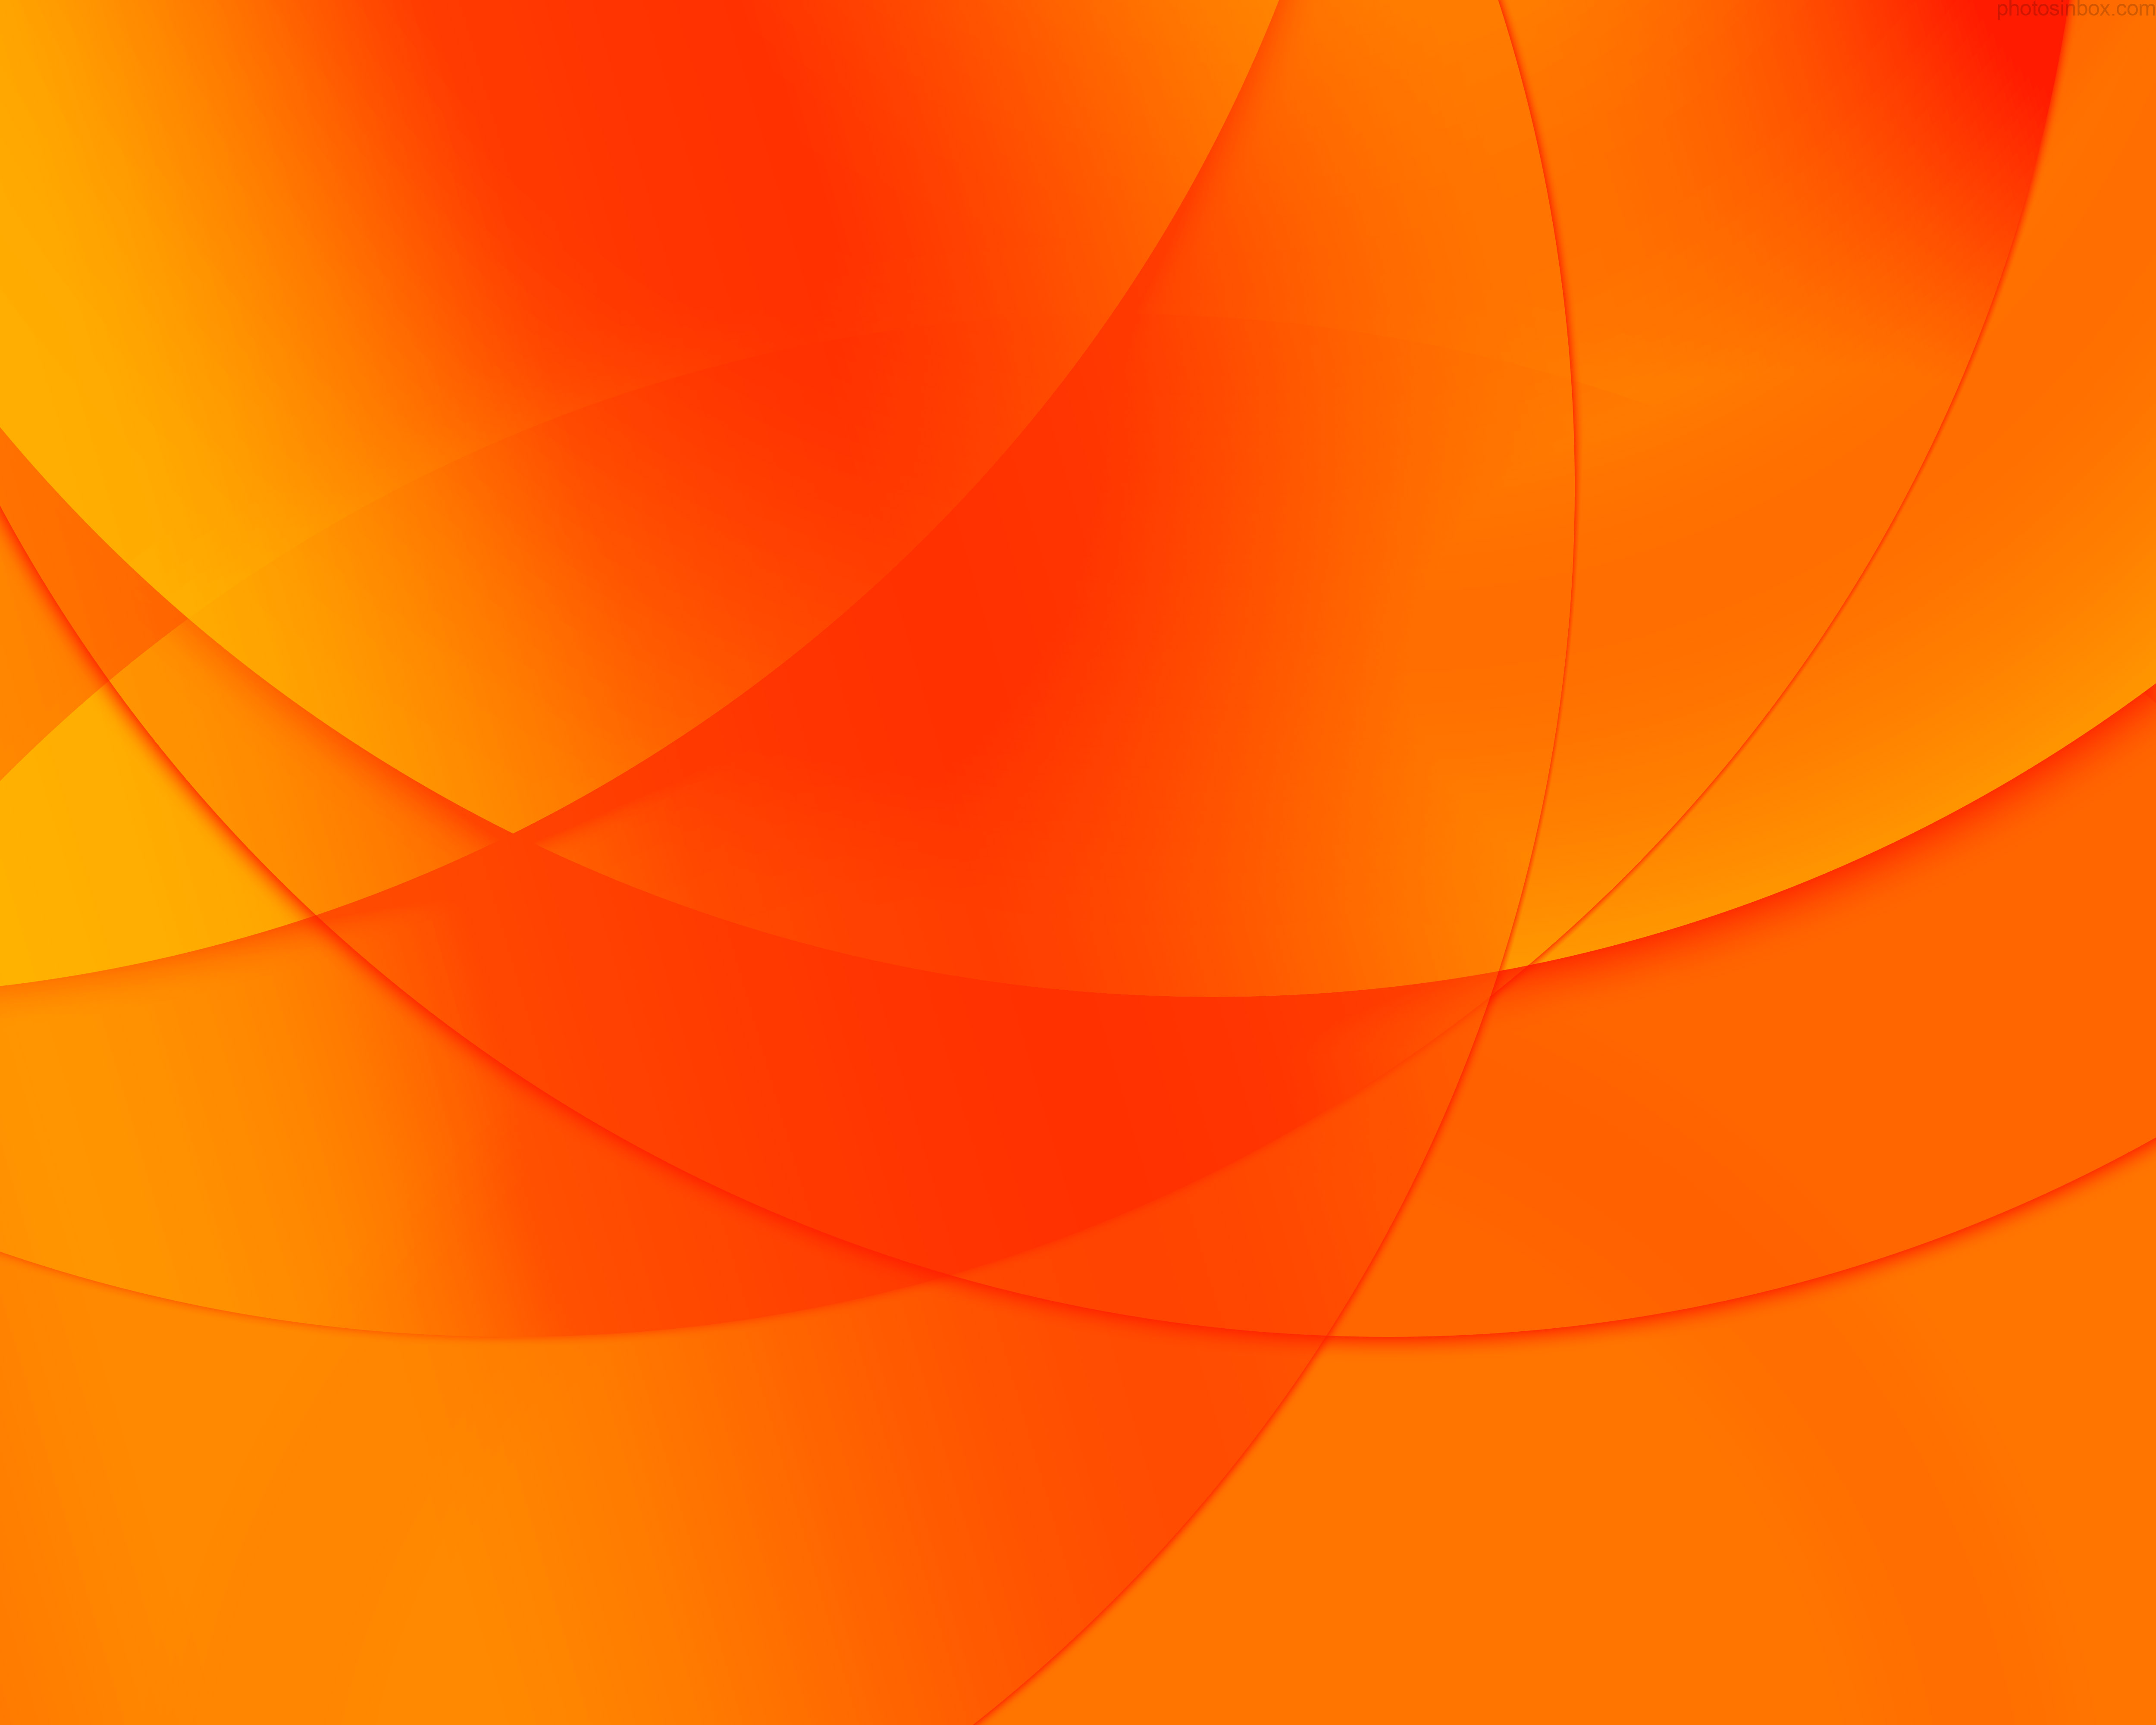 Cool Orange Backgrounds Wallpapers Most Popular Cool Orange Backgrounds Backgrounds Browsecat Net